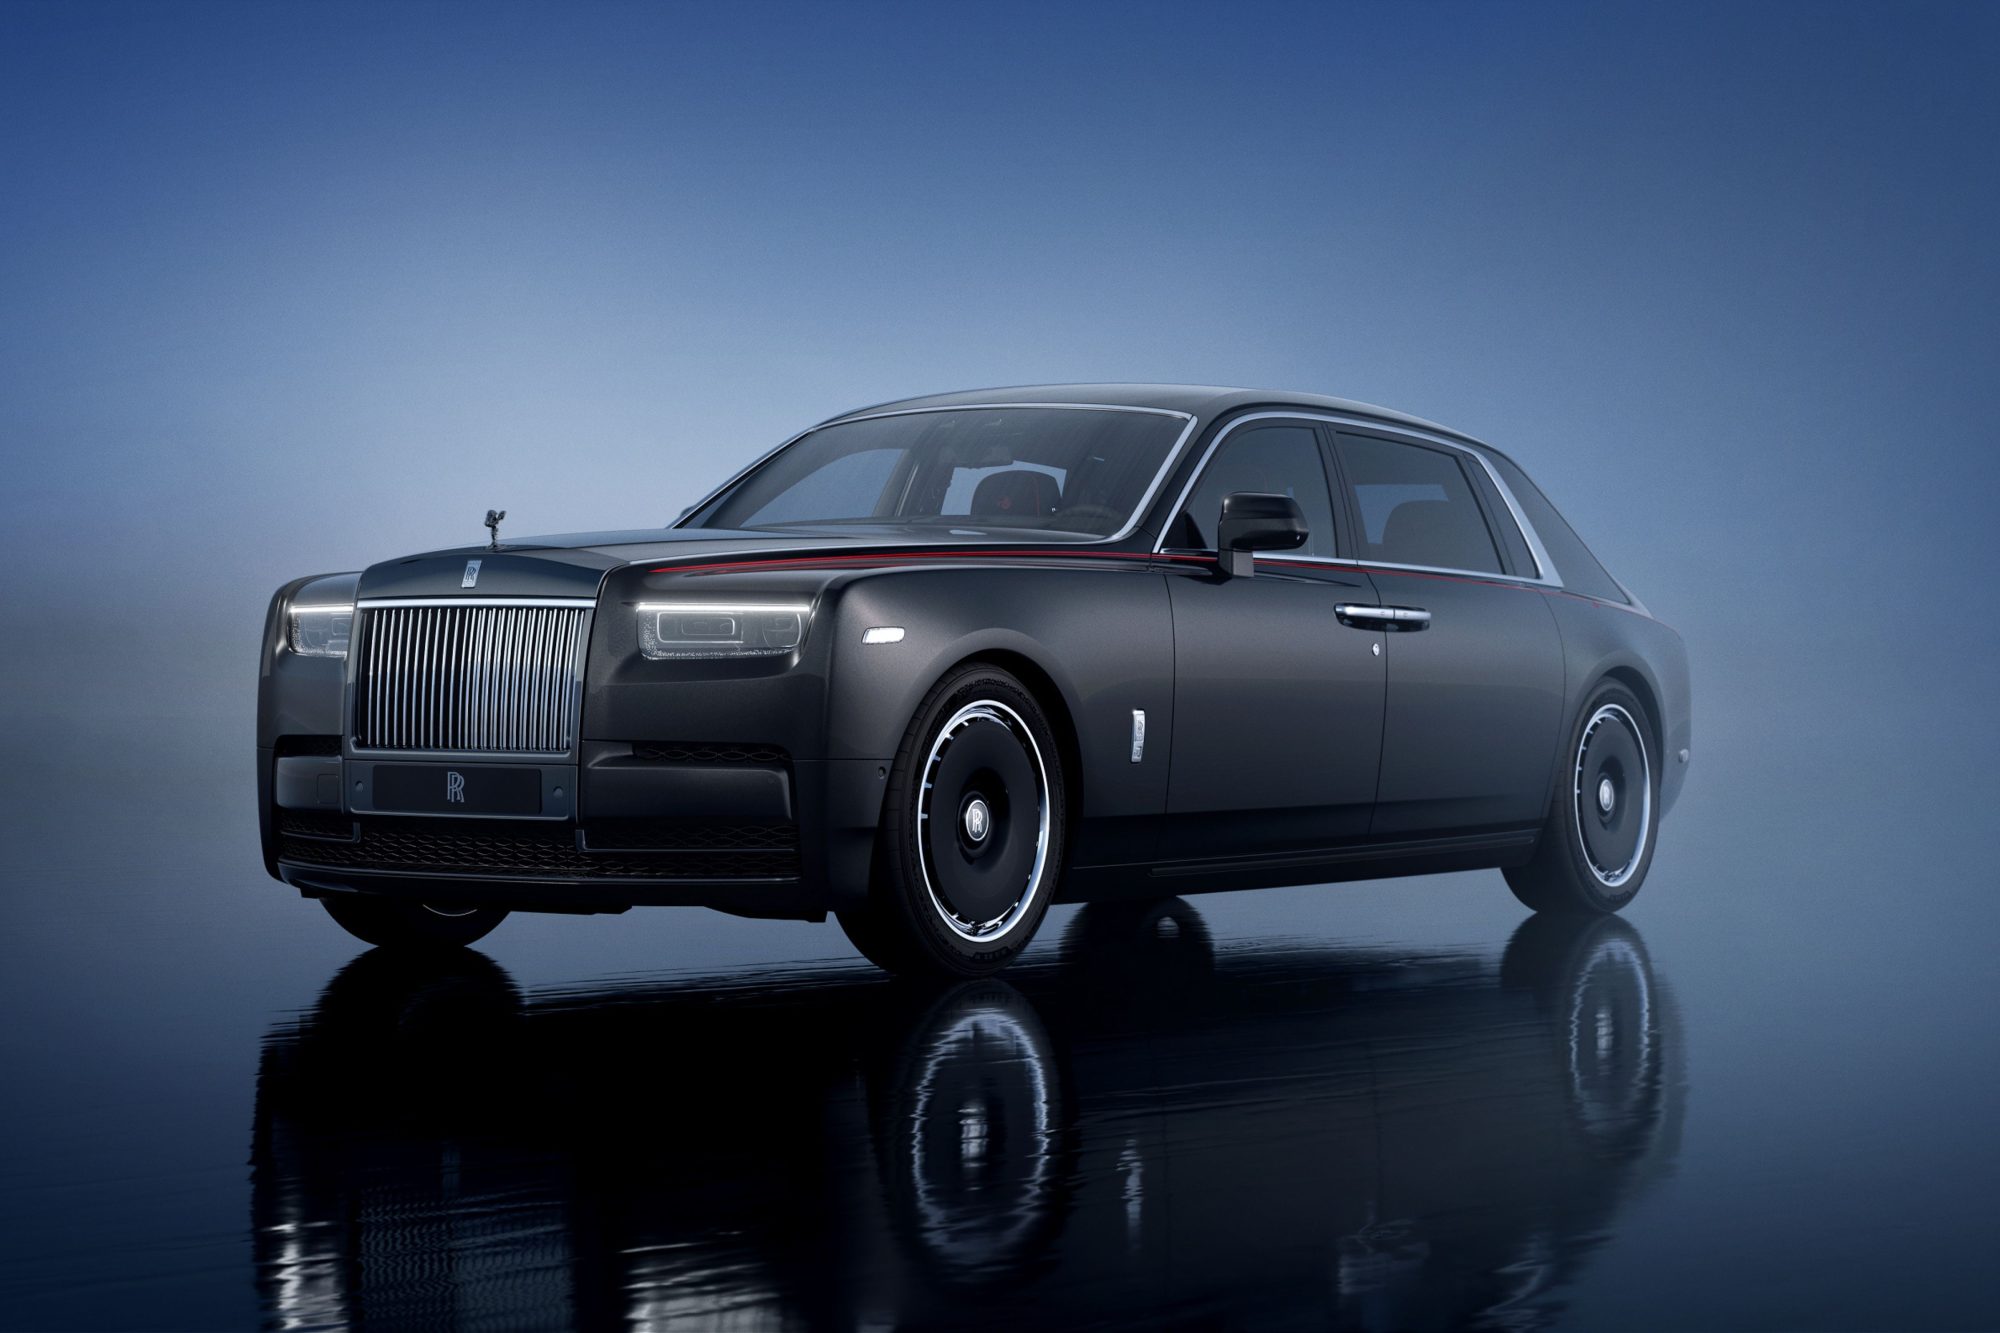 Rolls-Royce Motor Cars presents four magnificent ‘Year of the Dragon’ Bespoke commissions